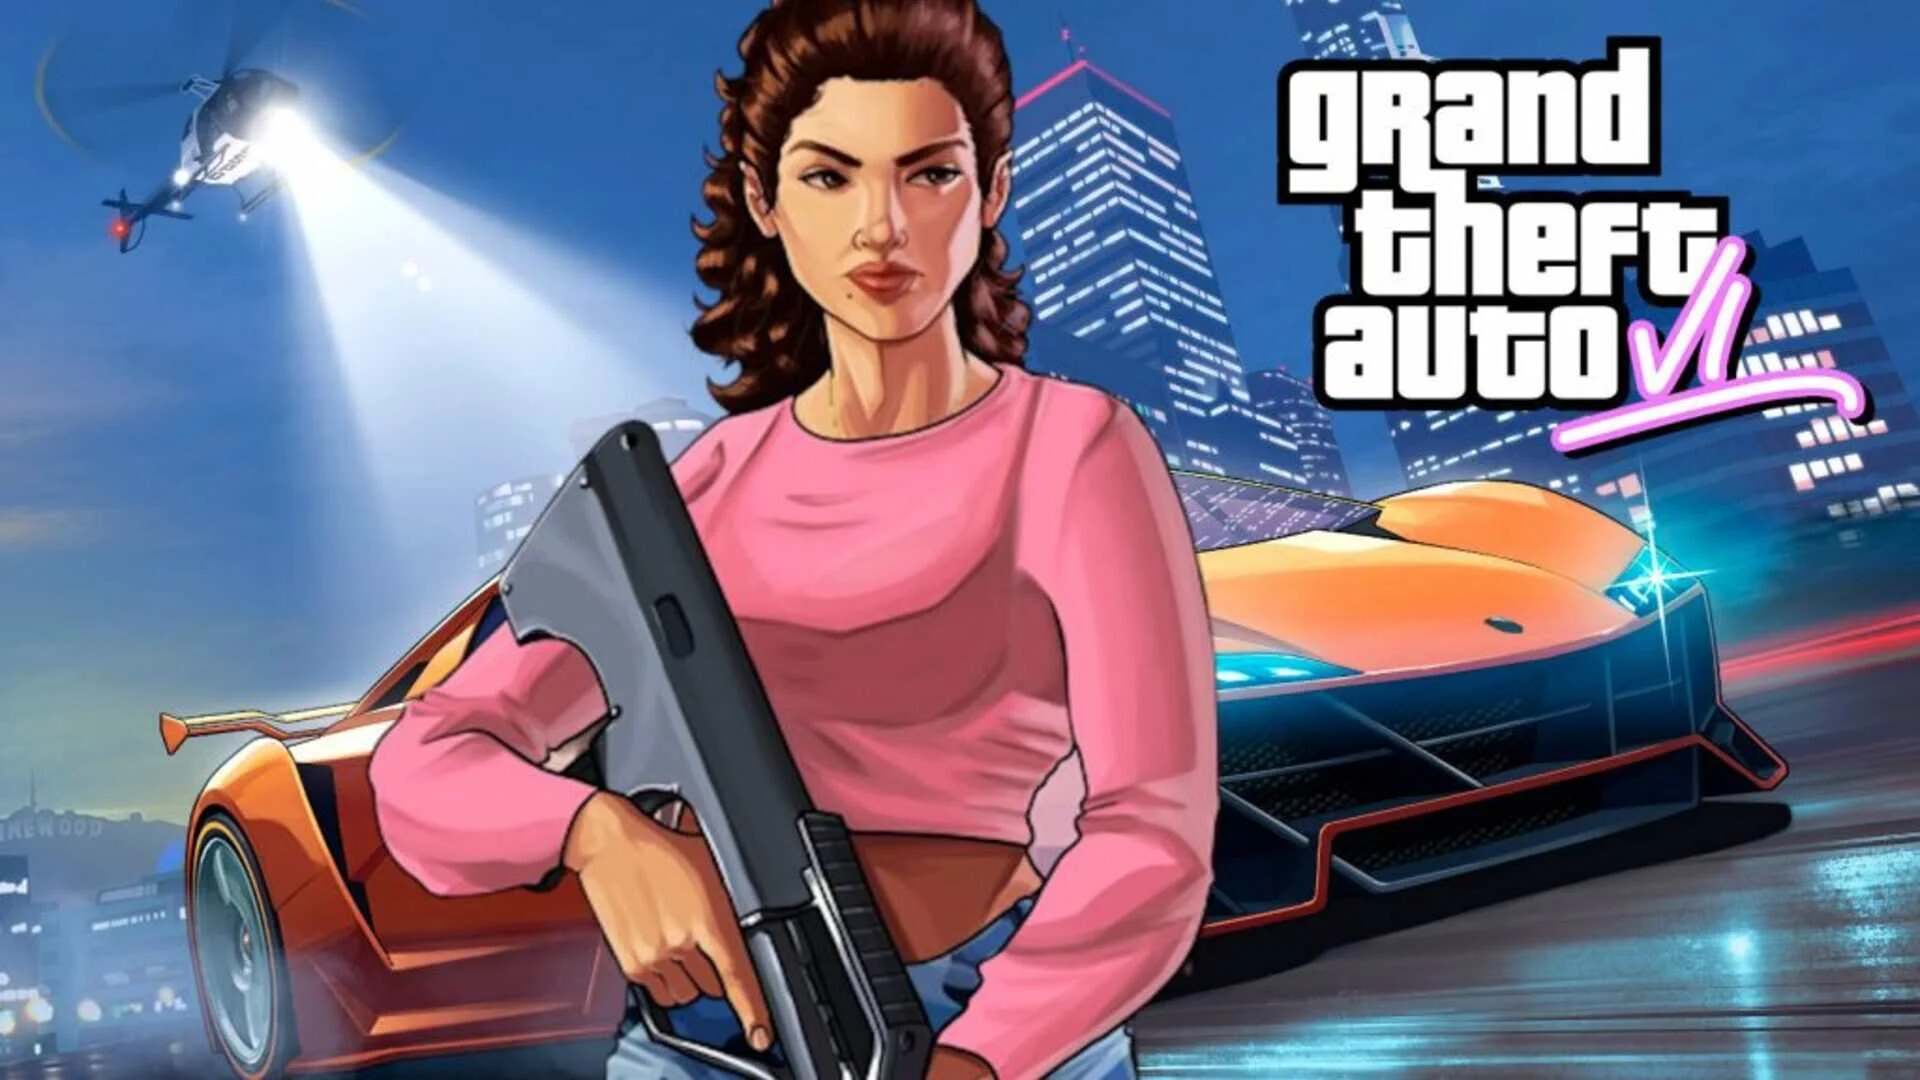 A reputable insider is tired of constant questions about the announcement of GTA 6